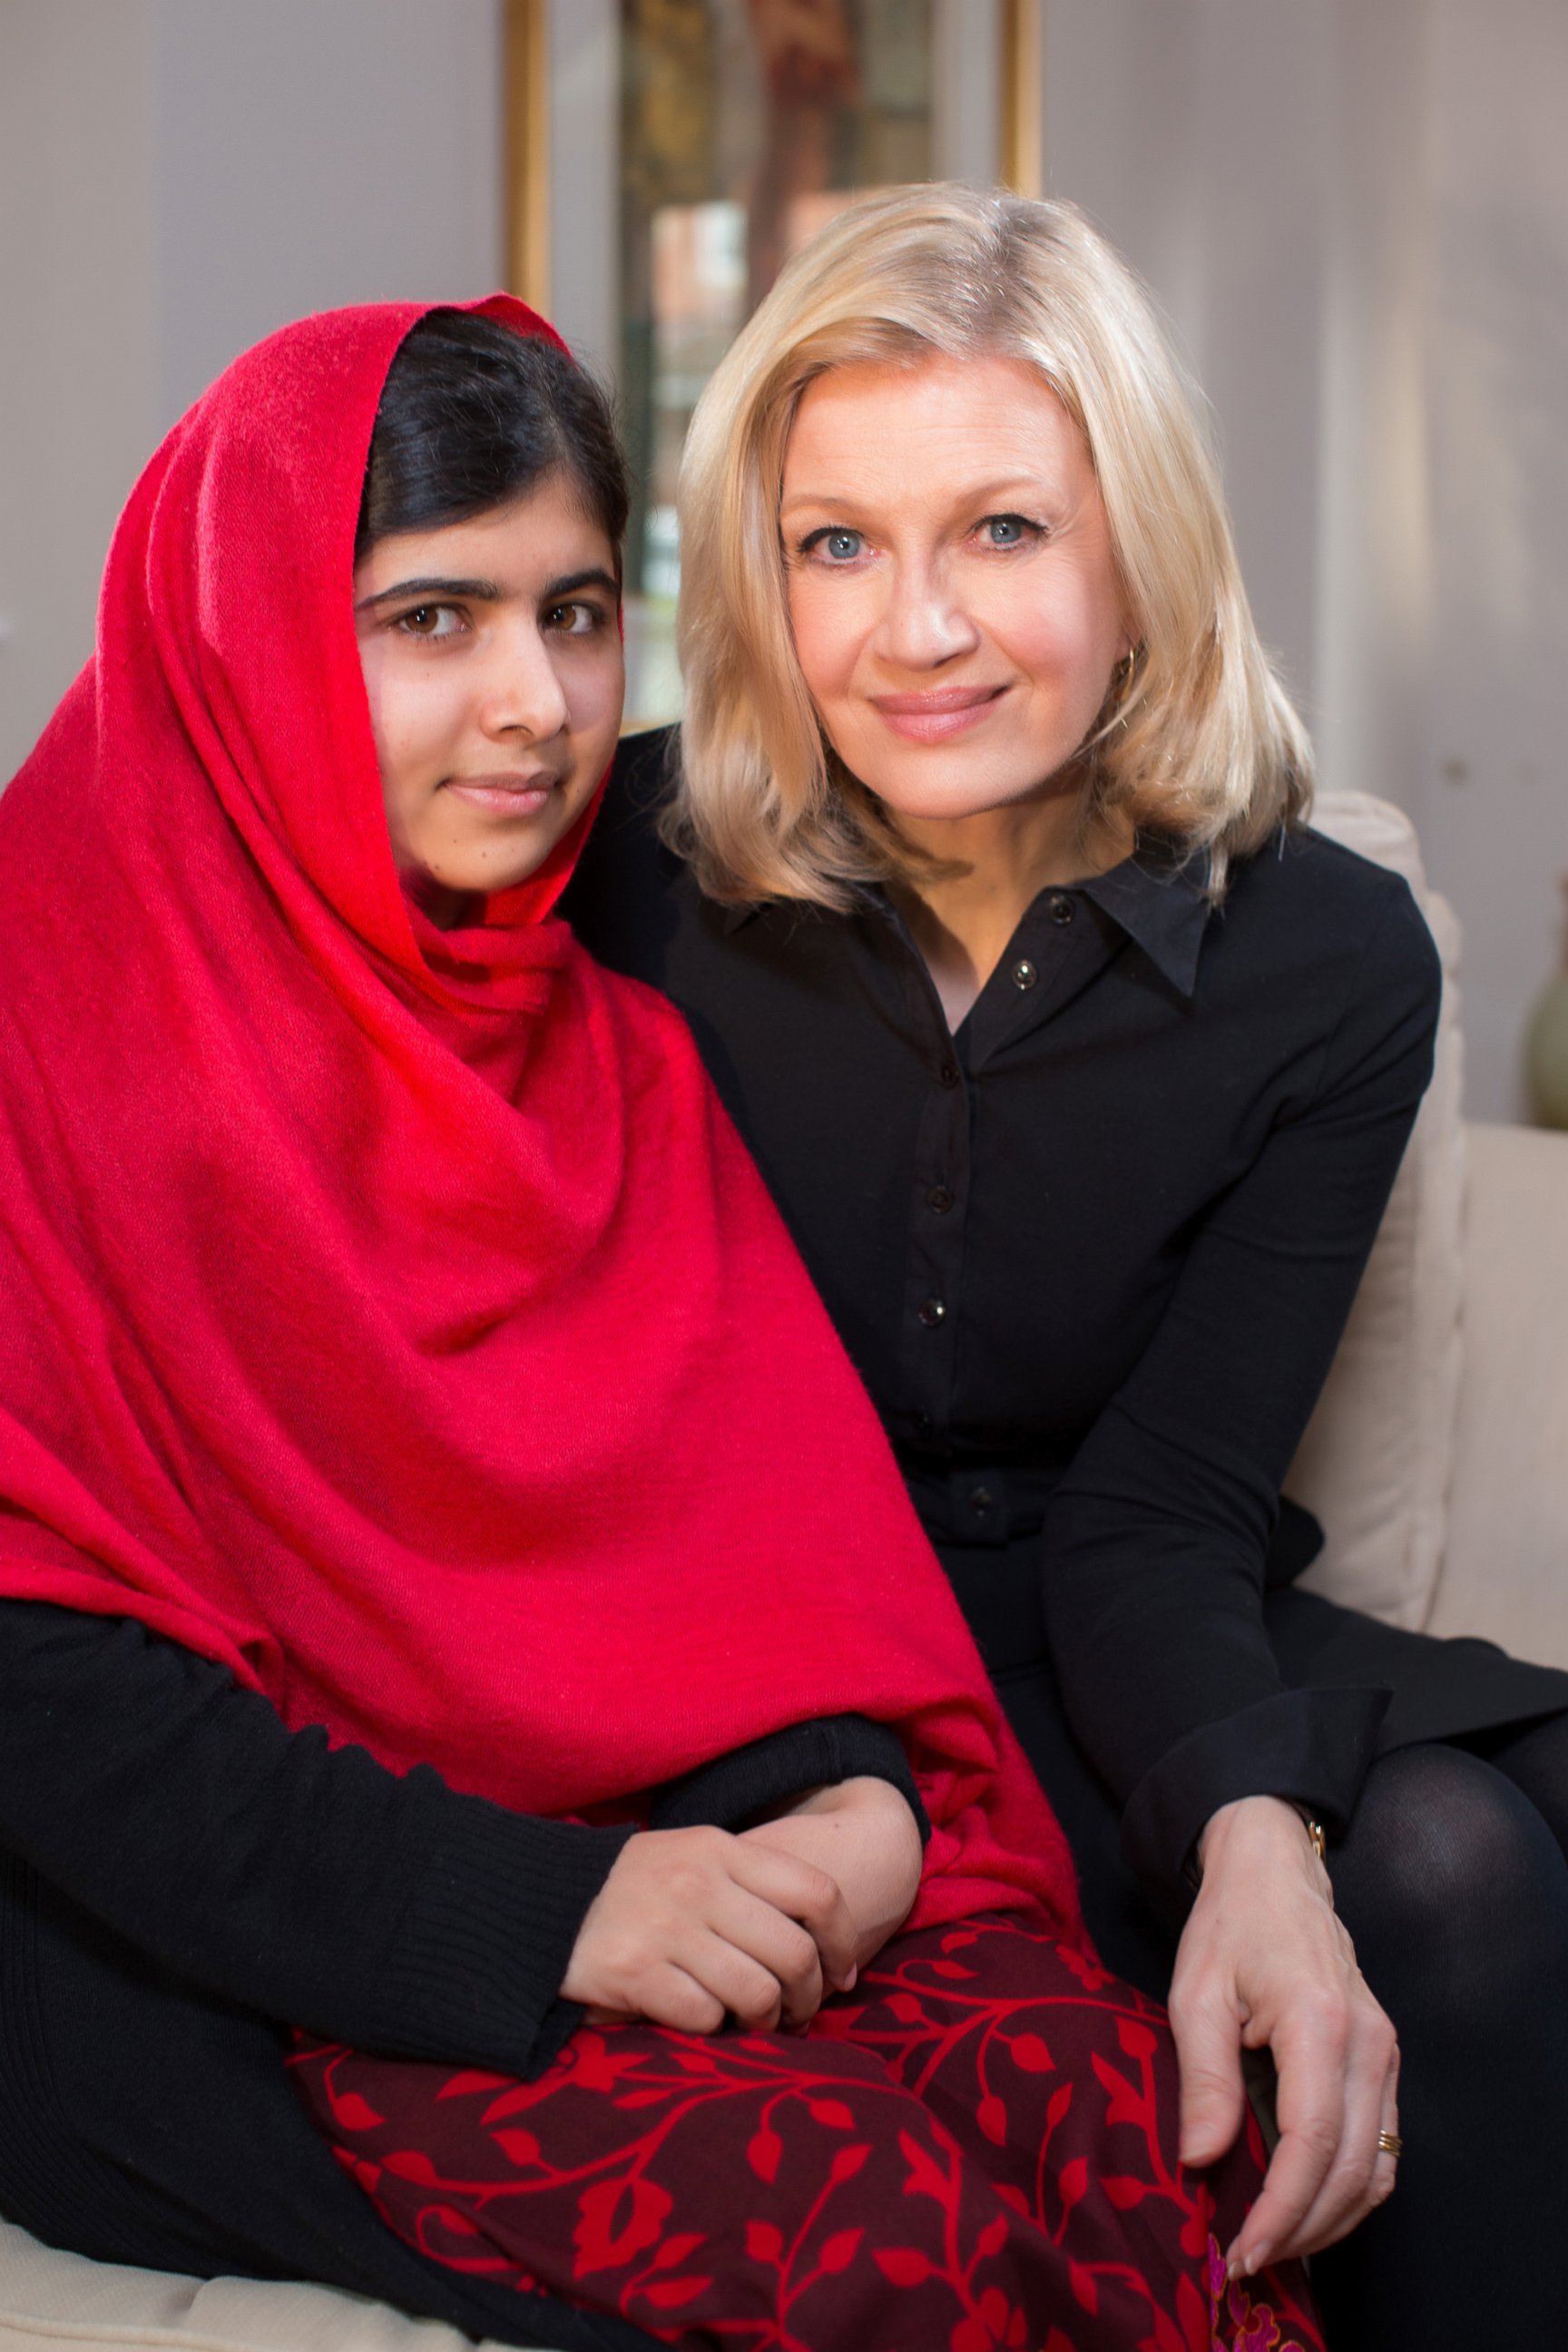 PHOTO: Diane Sawyer conducts the first television interview with Malala Yousafzai, the schoolgirl from Pakistan who was shot by the Taliban in October 2012 because she believed girls should have the right to go to school.